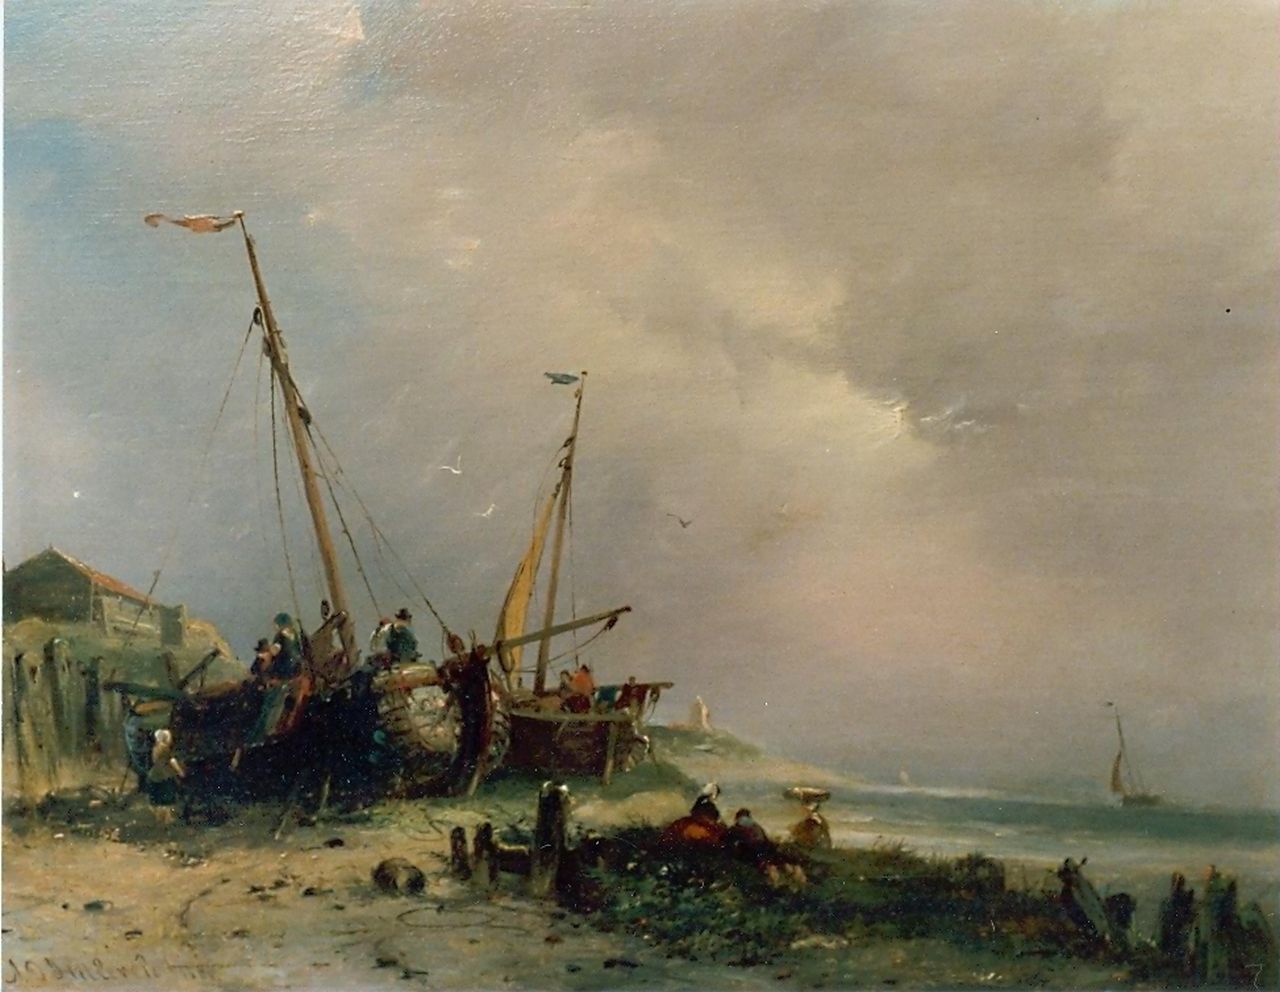 Hilleveld A.D.  | Adrianus David Hilleveld, Fishermen and boats on the beach, oil on panel 25.0 x 32.0 cm, signed l.l. and dated 1881